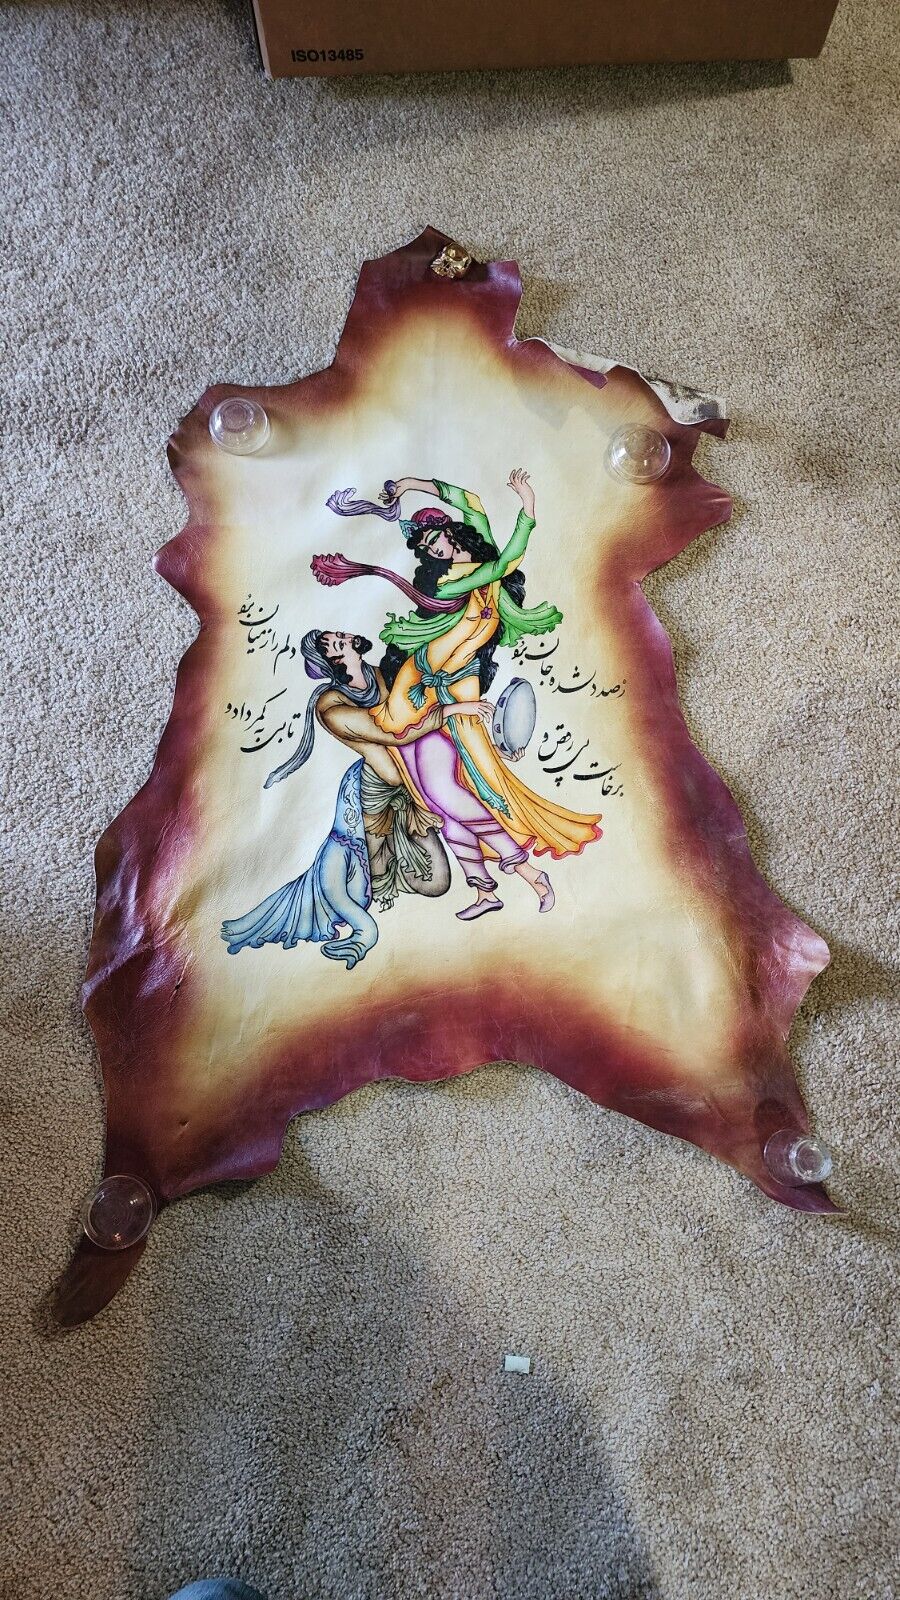 MAN AND WOMAN DANCNIG, HANDCRAFTED PAINTED PERSIAN ART ON REAL LAMB SKIN